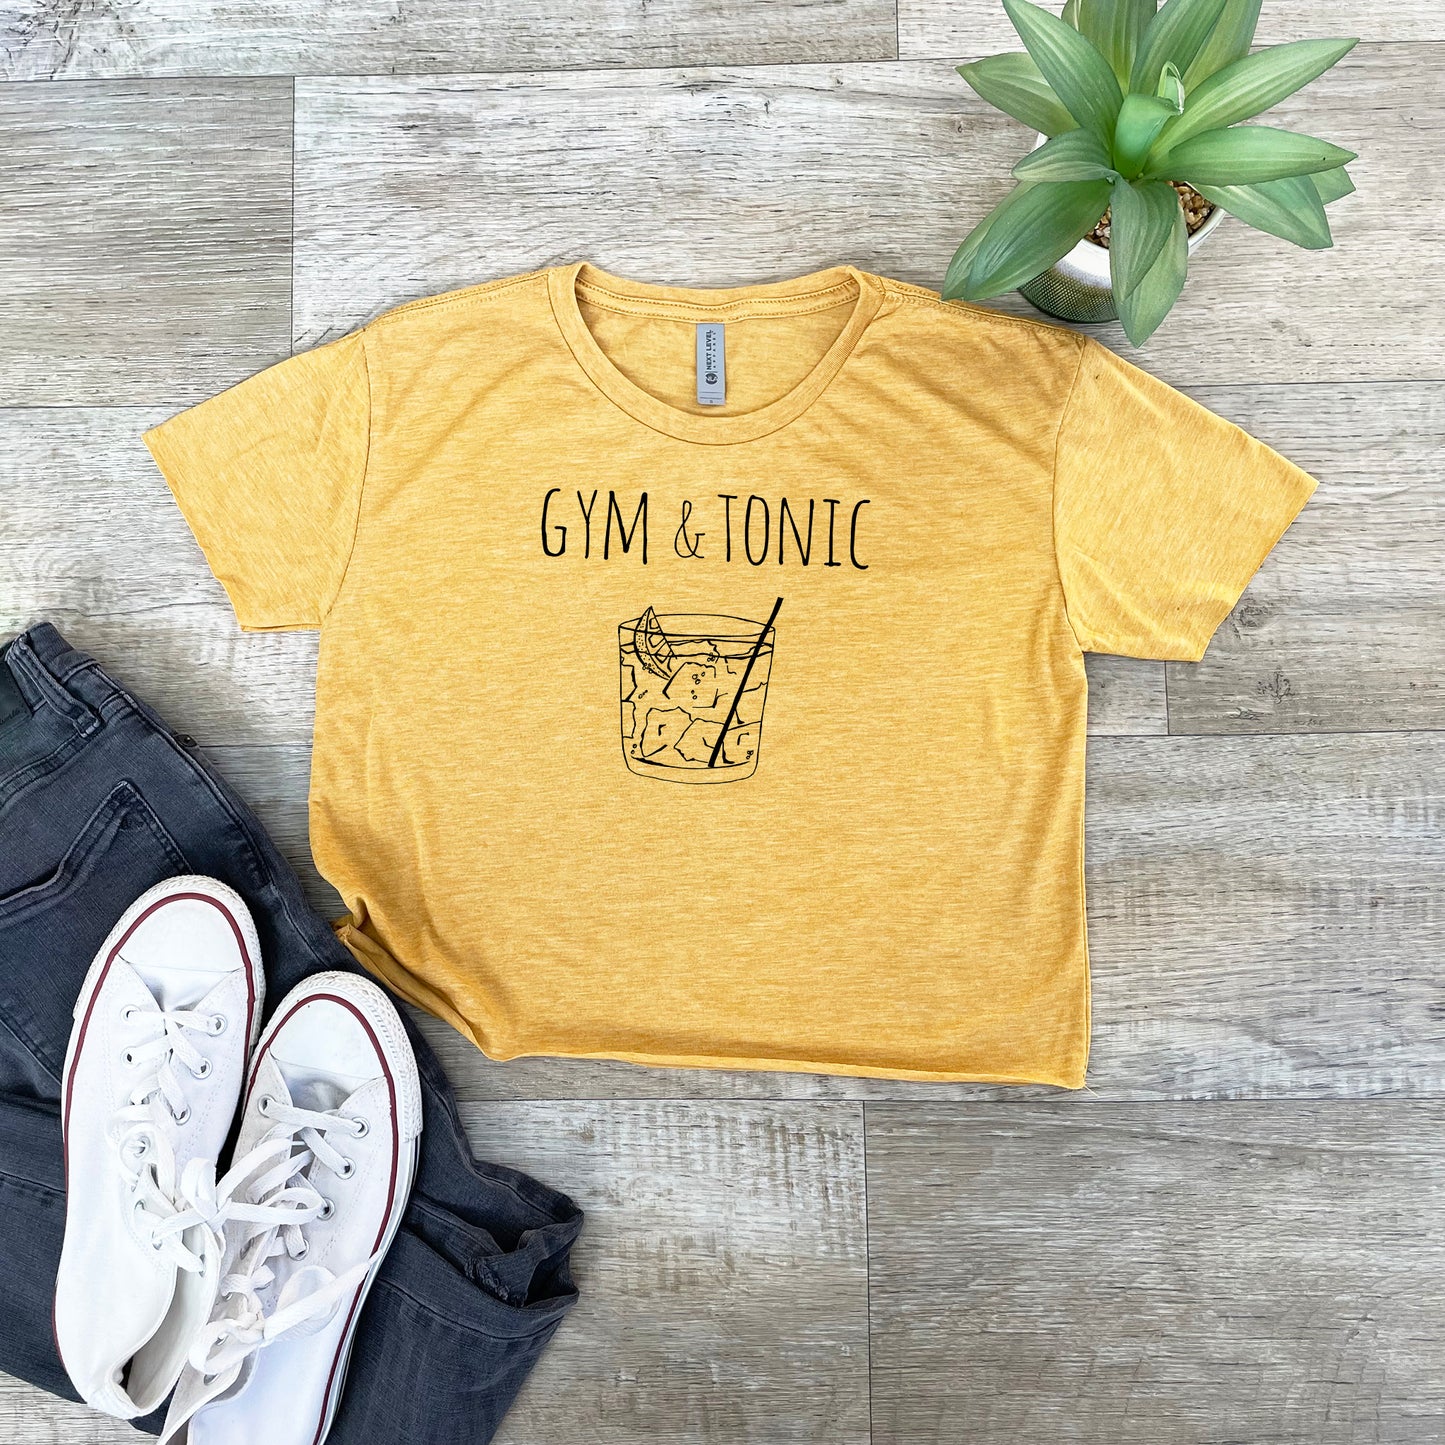 Gym & Tonic - Women's Crop Tee - Heather Gray or Gold